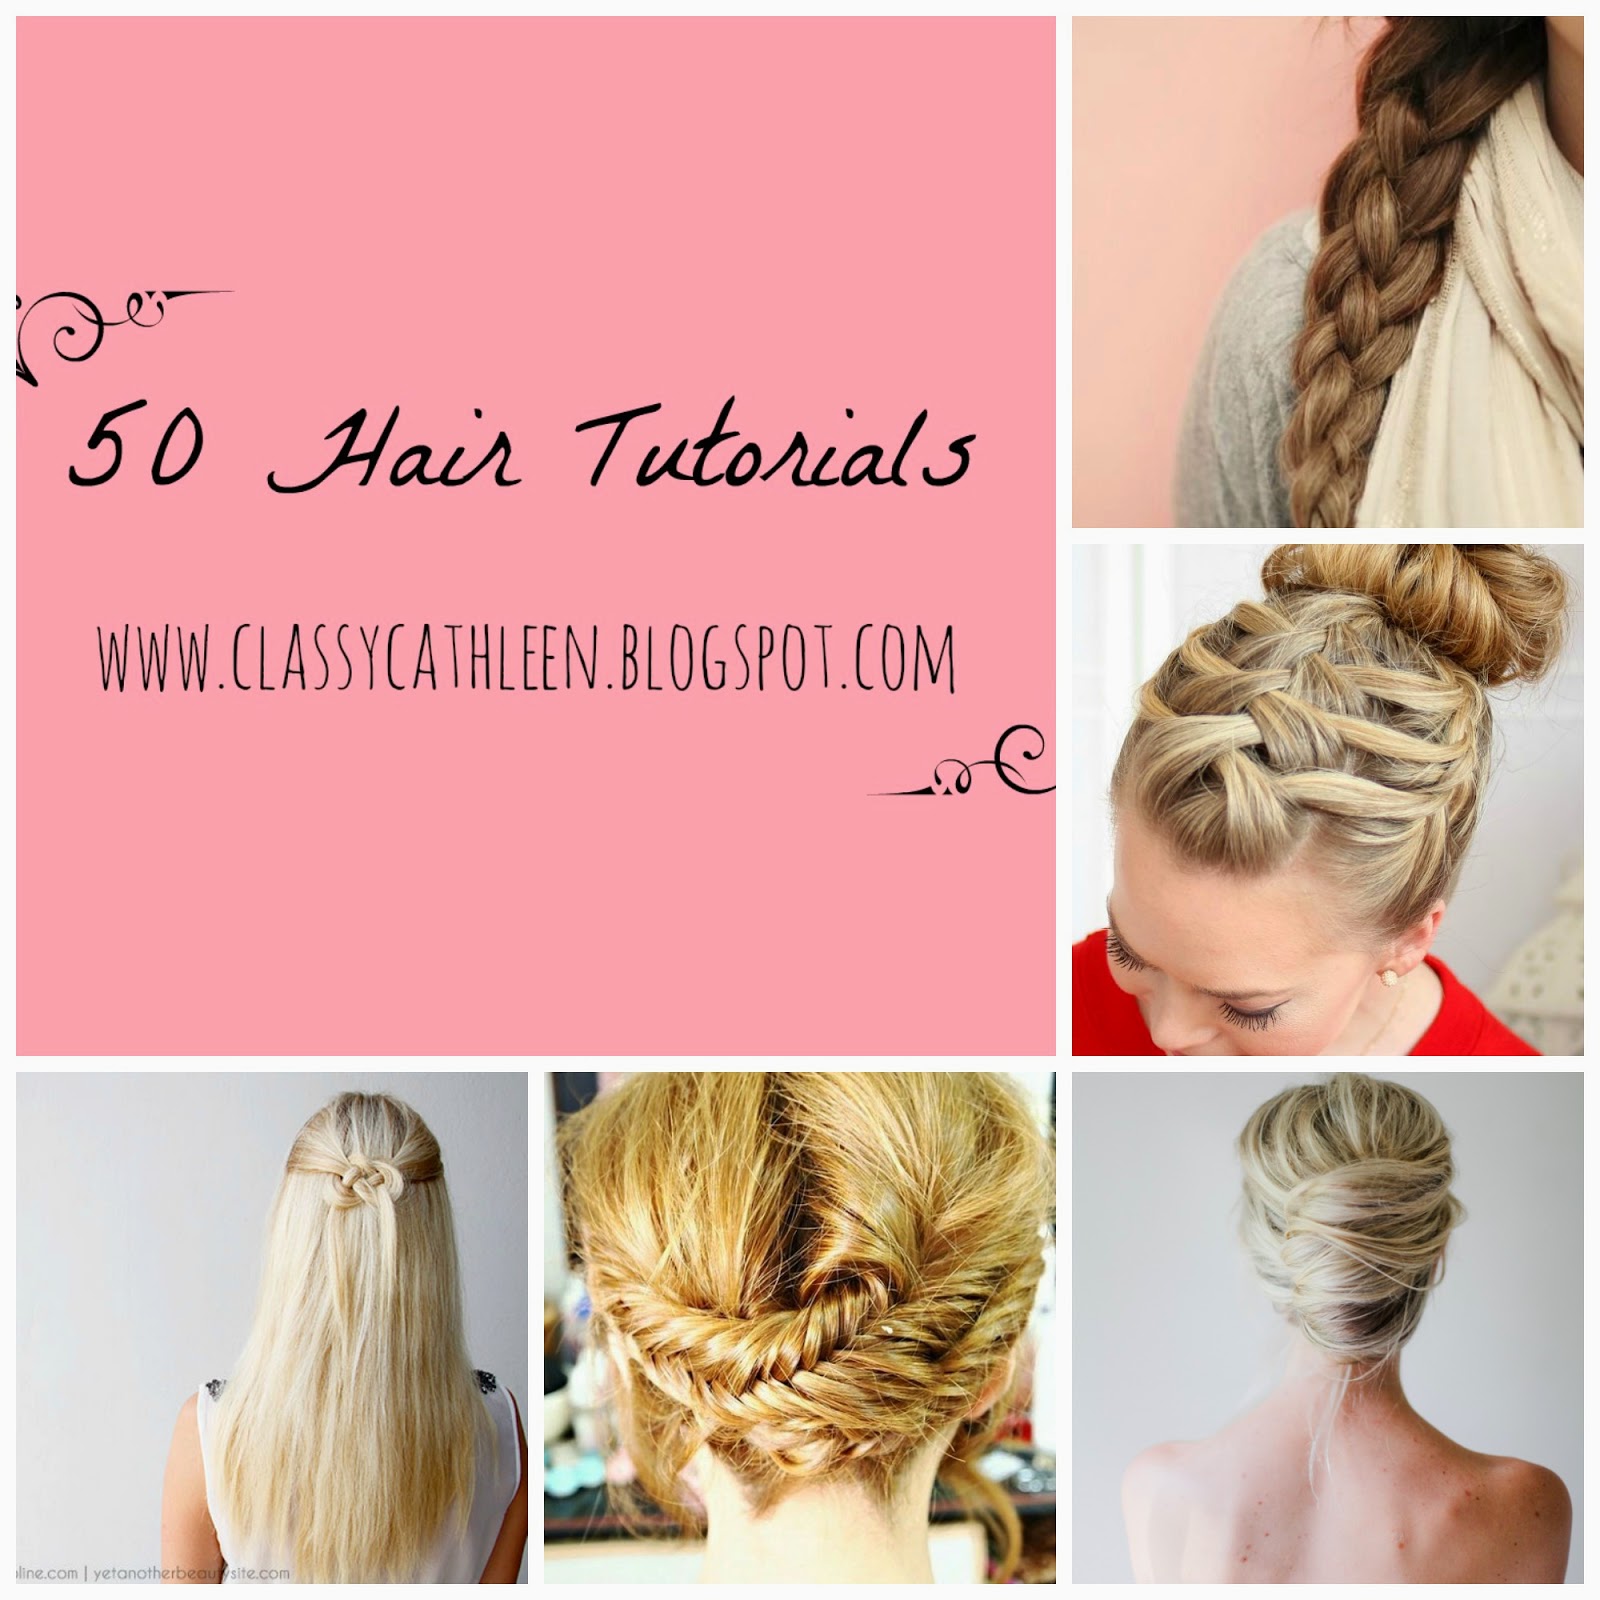 Classy Cathleen 50 Hairstyles And Tips That Every Girl Should Know